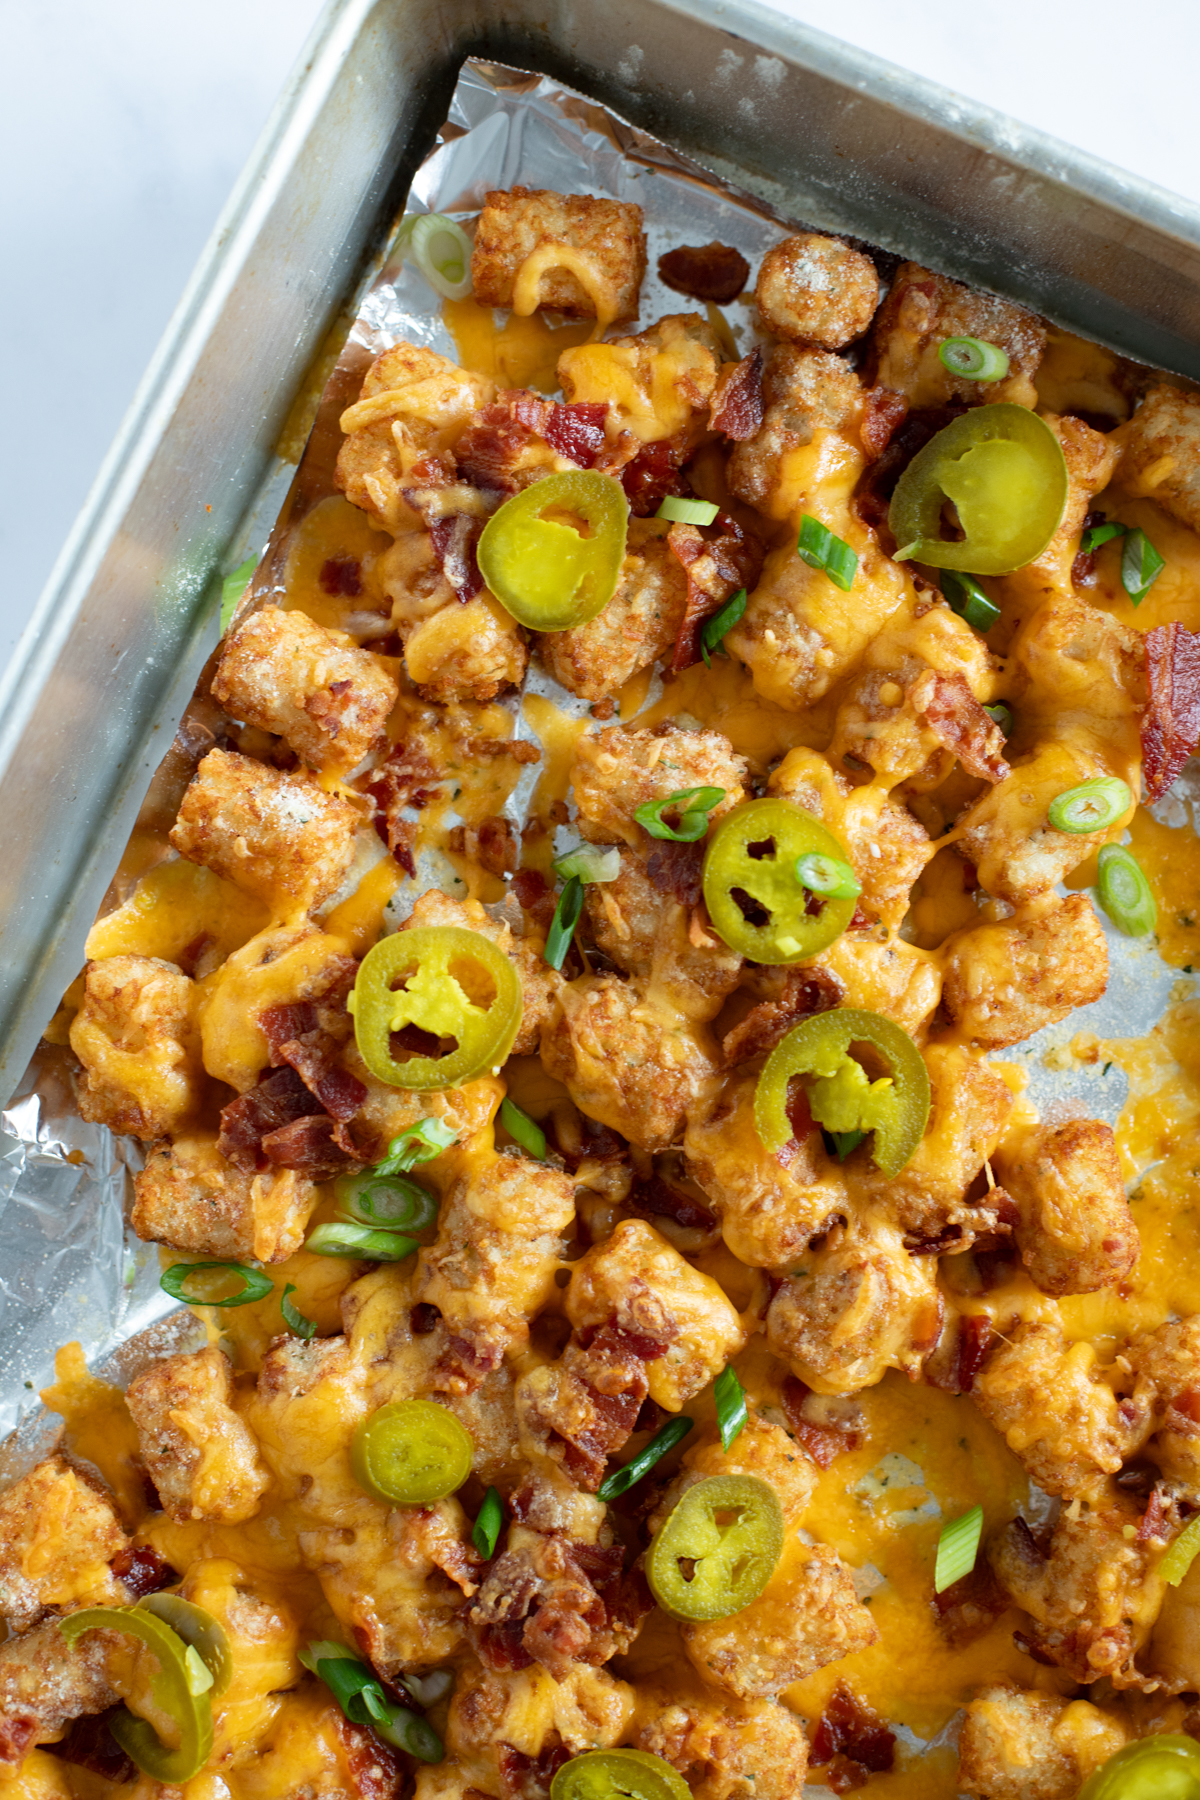 Loaded tater tots on a baking sheet with melted cheese and jalapeños.